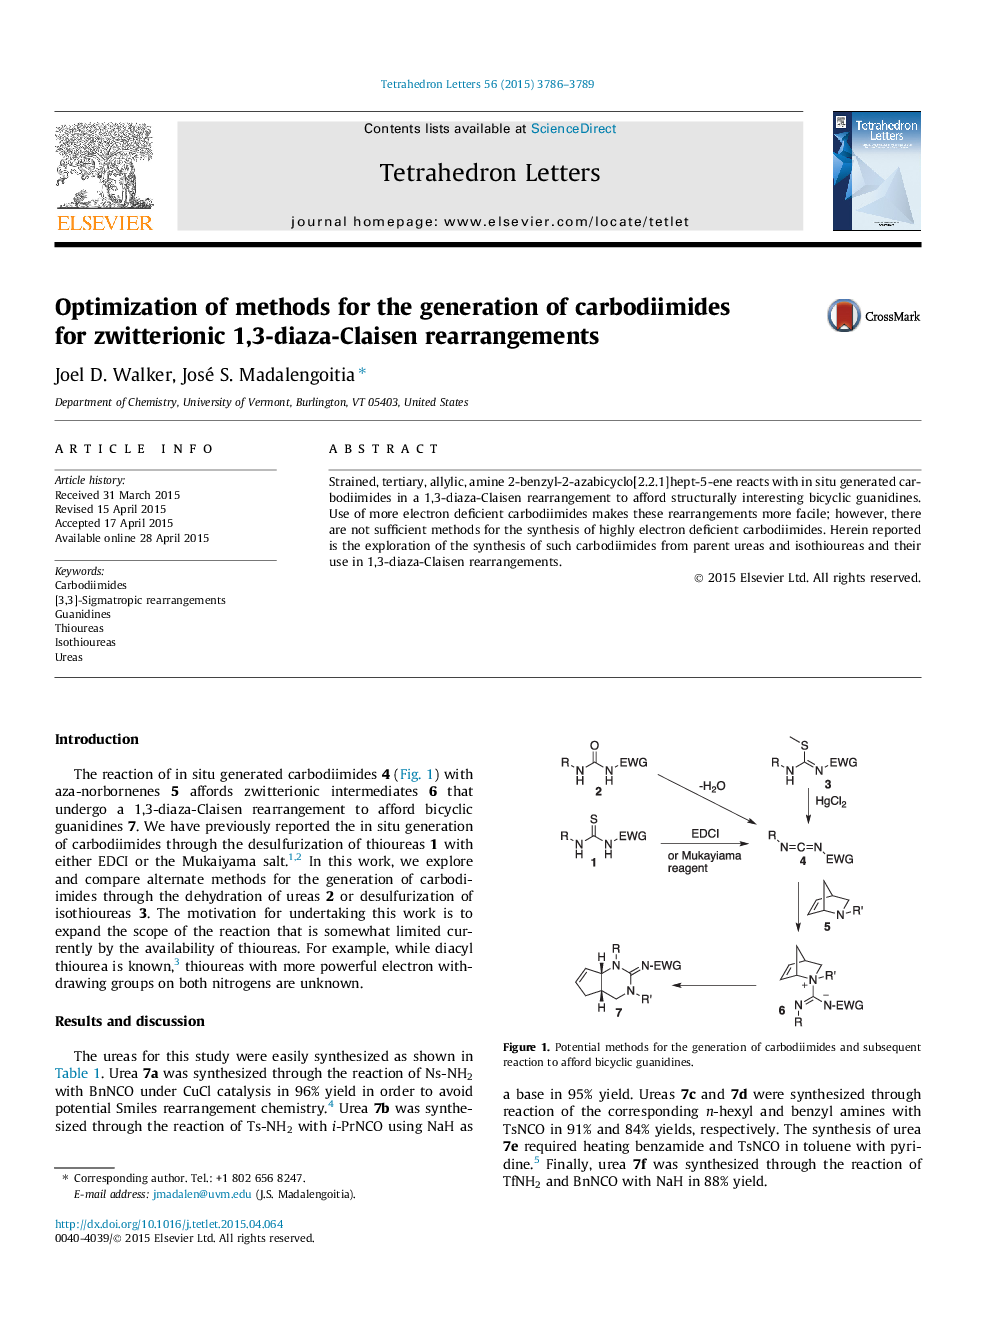 Optimization of methods for the generation of carbodiimides for zwitterionic 1,3-diaza-Claisen rearrangements